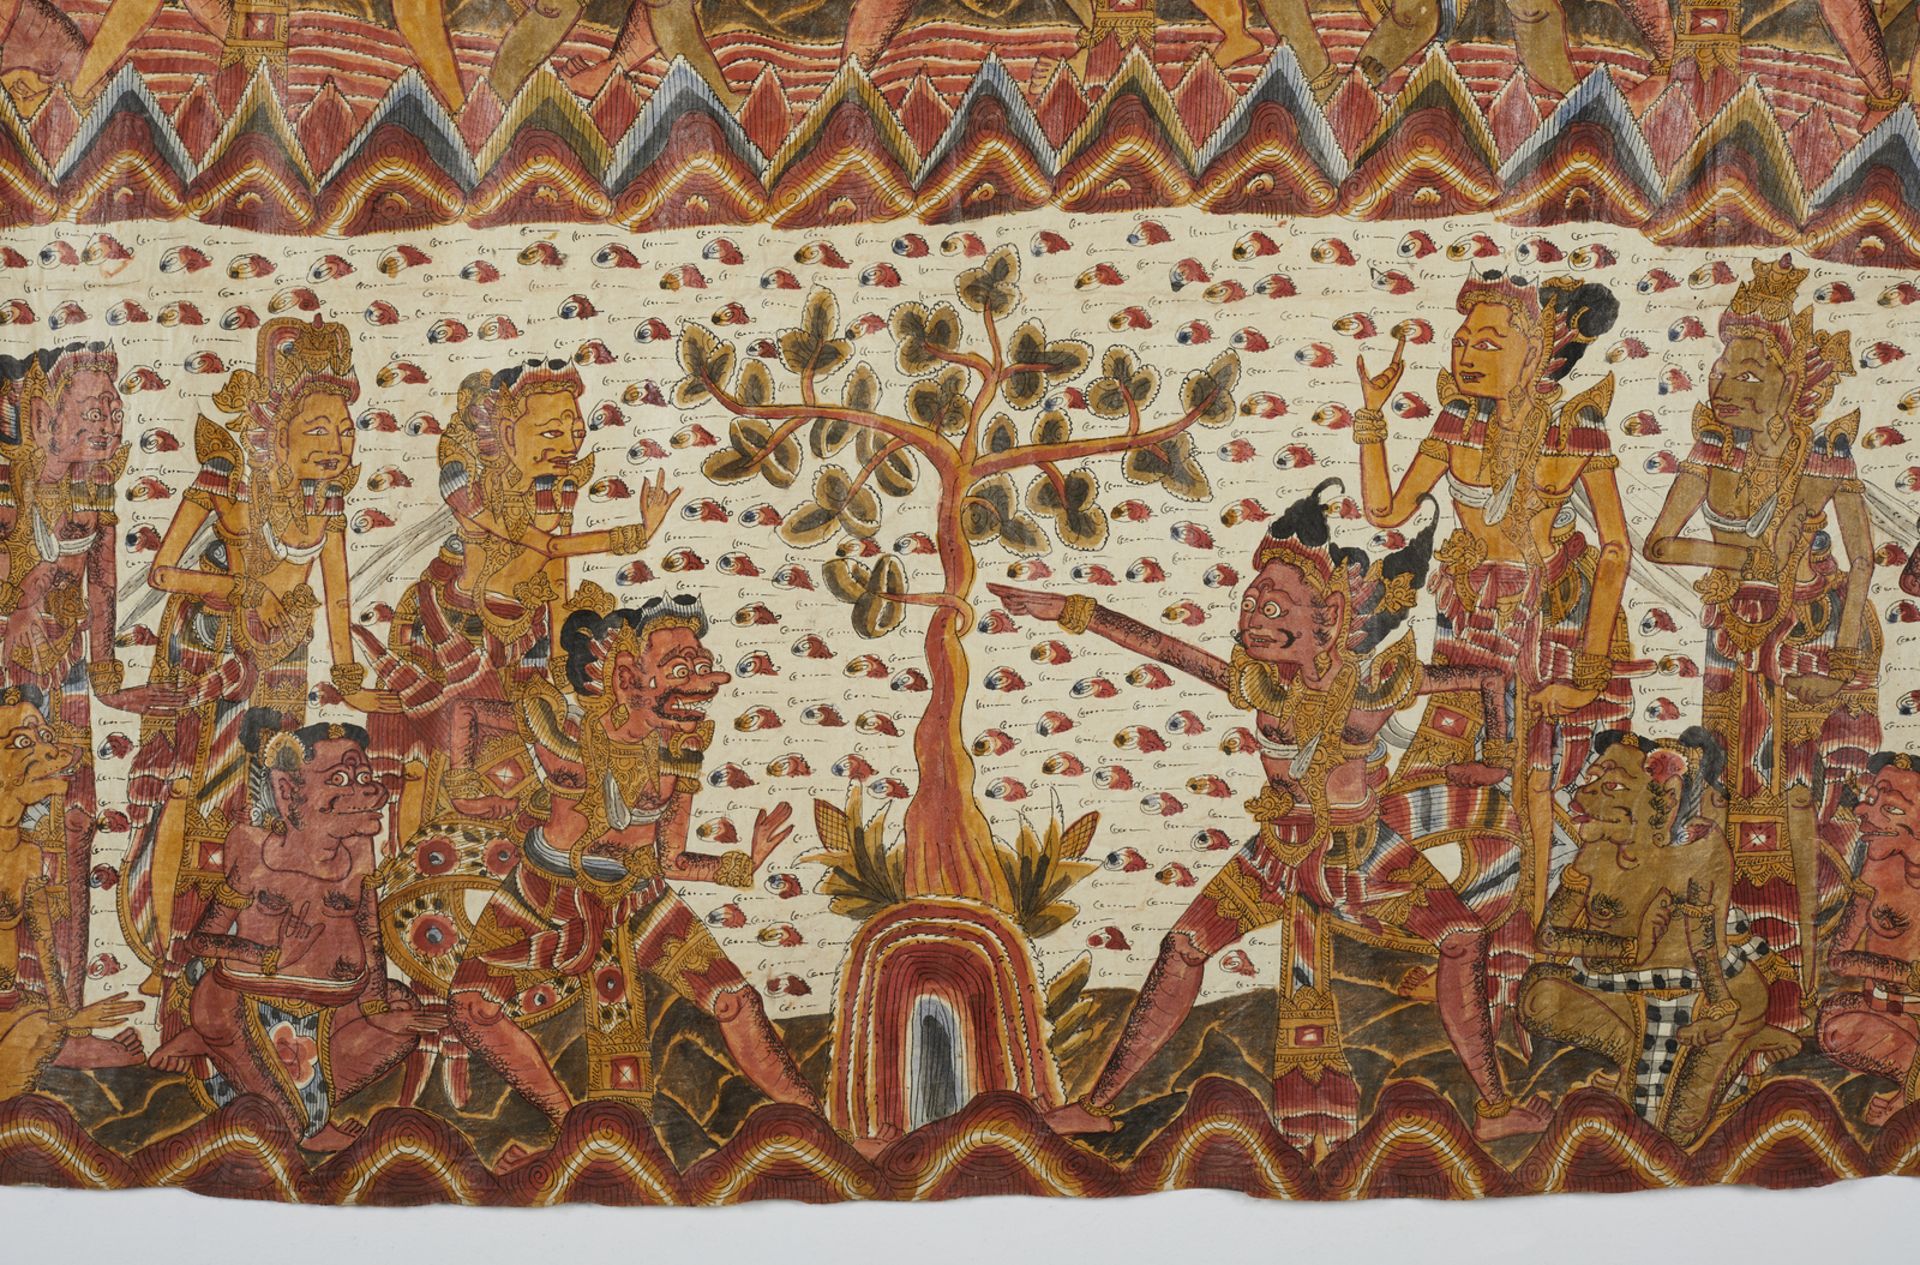 Arte Sud-Est Asiatico A large textile painted with epic scenes Bali, 20th century . - Image 2 of 2